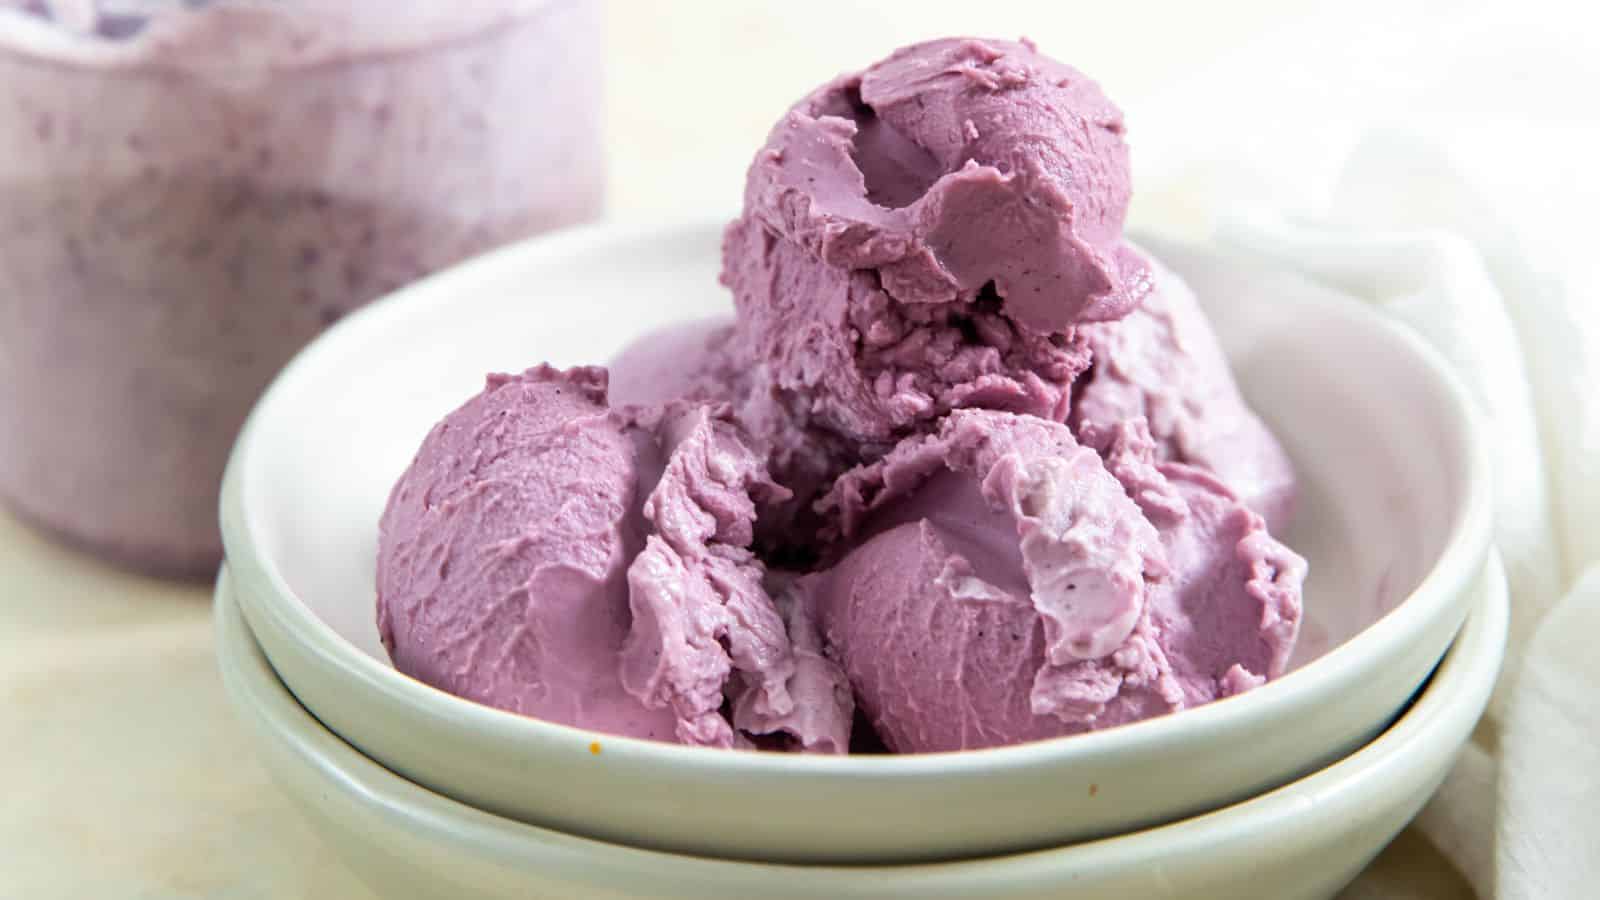 Bluberry Frozen Yogurt in a white bowl with an ice cream scoop.